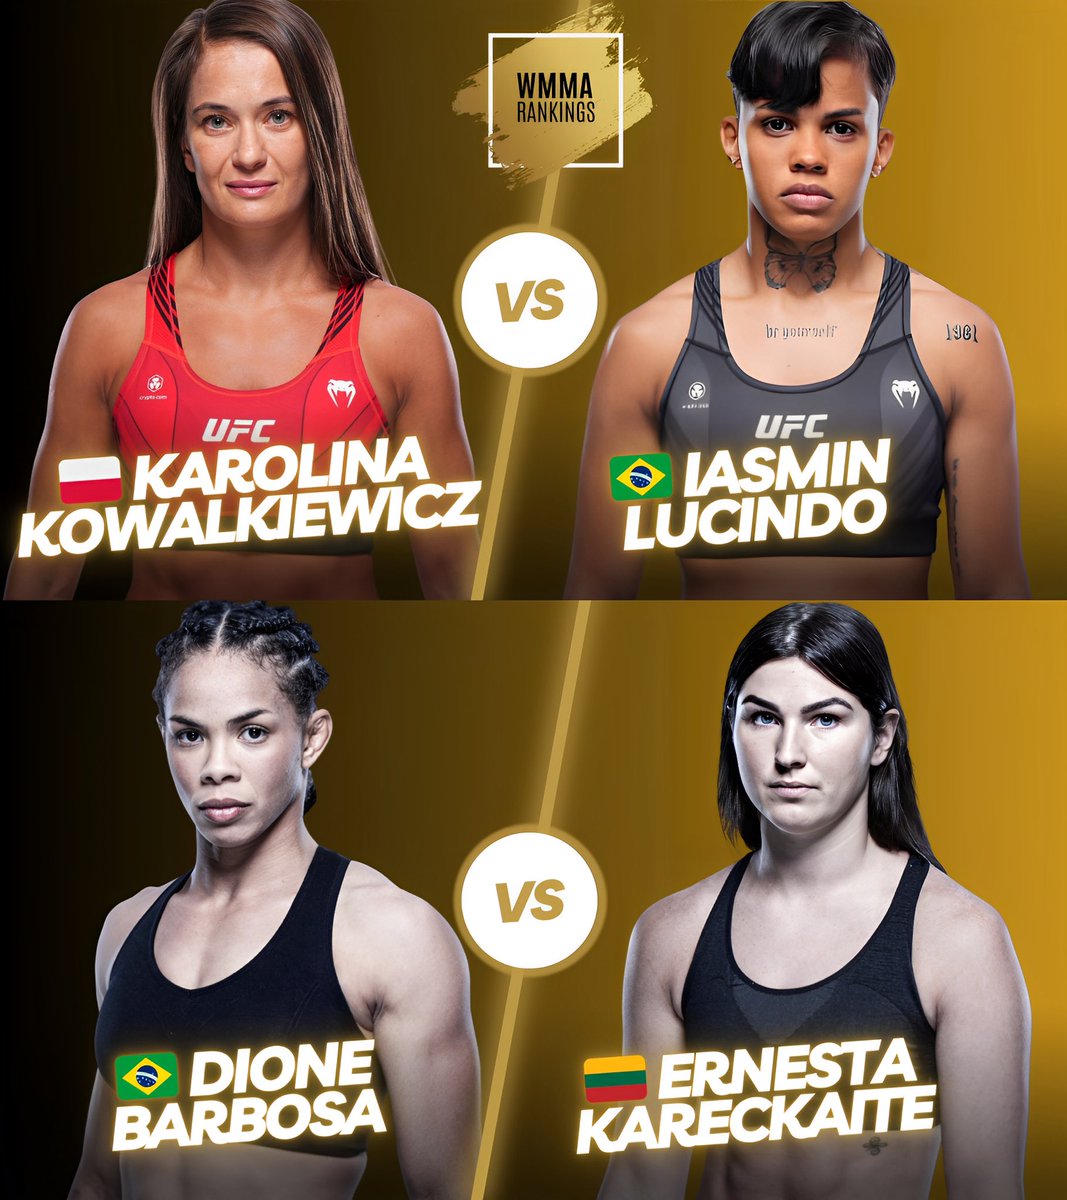 💥🥊 Fight week is here for #UFC301 in Brazil this Saturday! #13 ranked former title challenger 🇵🇱 Karolina Kowalkiewicz squares off against the surging 22-year-old 🇧🇷 Iasmin Lucindo in strawweight action. Plus, DWCS winners clash as 🇧🇷 Dione Barbosa takes on undefeated 🇱🇹…